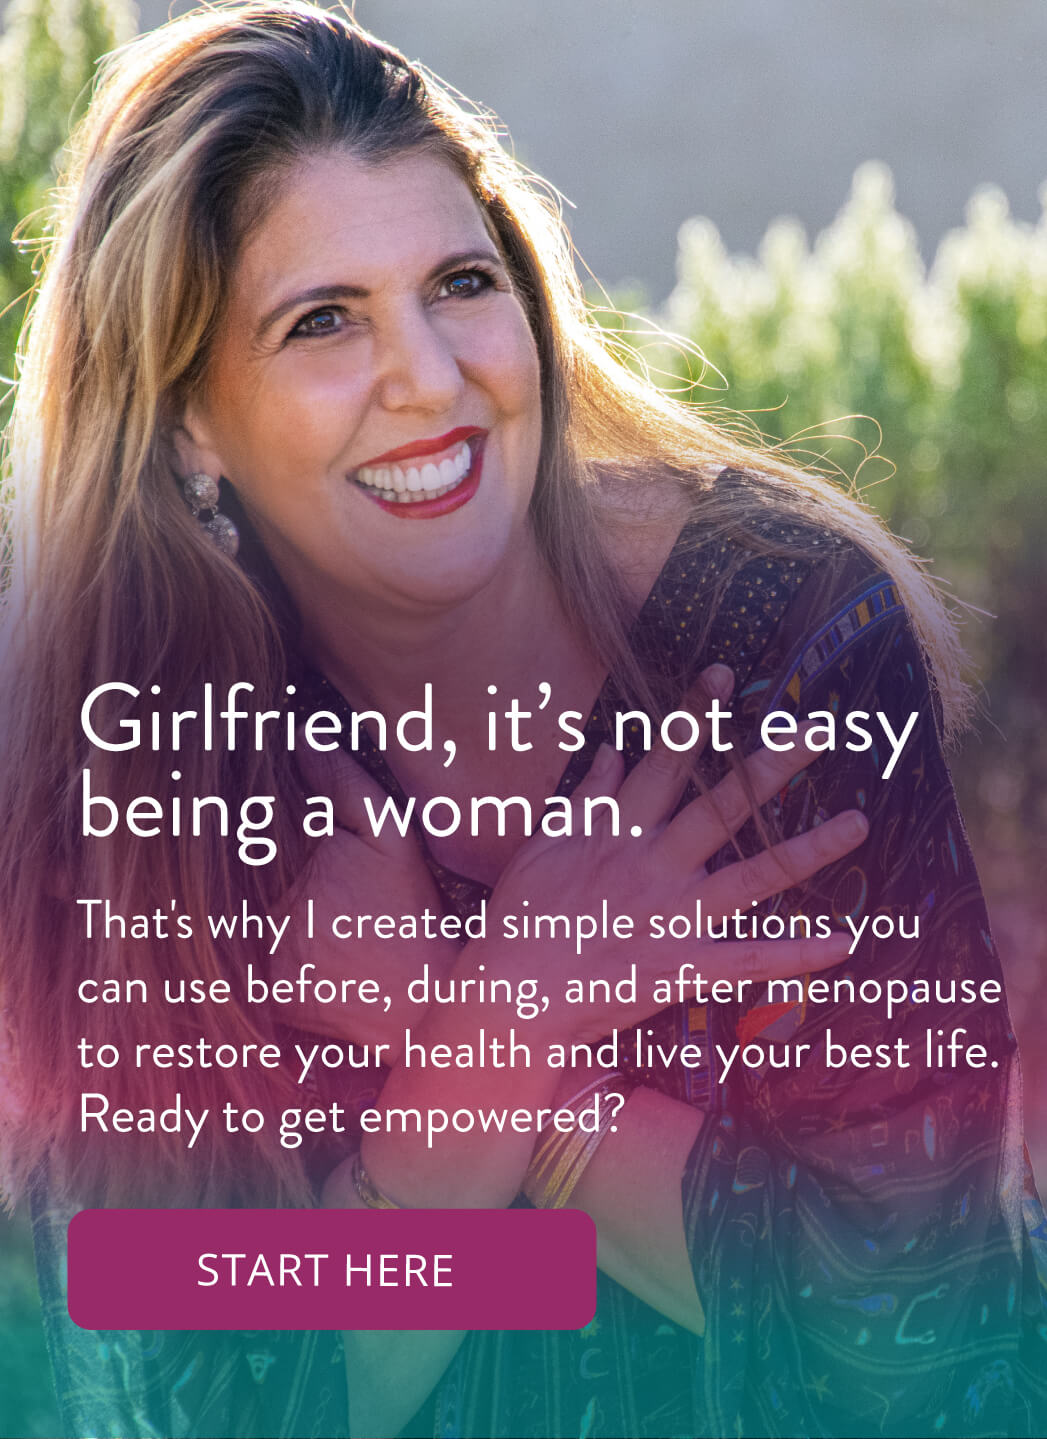 Girlfriend, it's not easy being a woman. That's why I created simple solutions you can use before, during, and after menopause to restore your health and live your best life. Ready to get empowered? Start here!